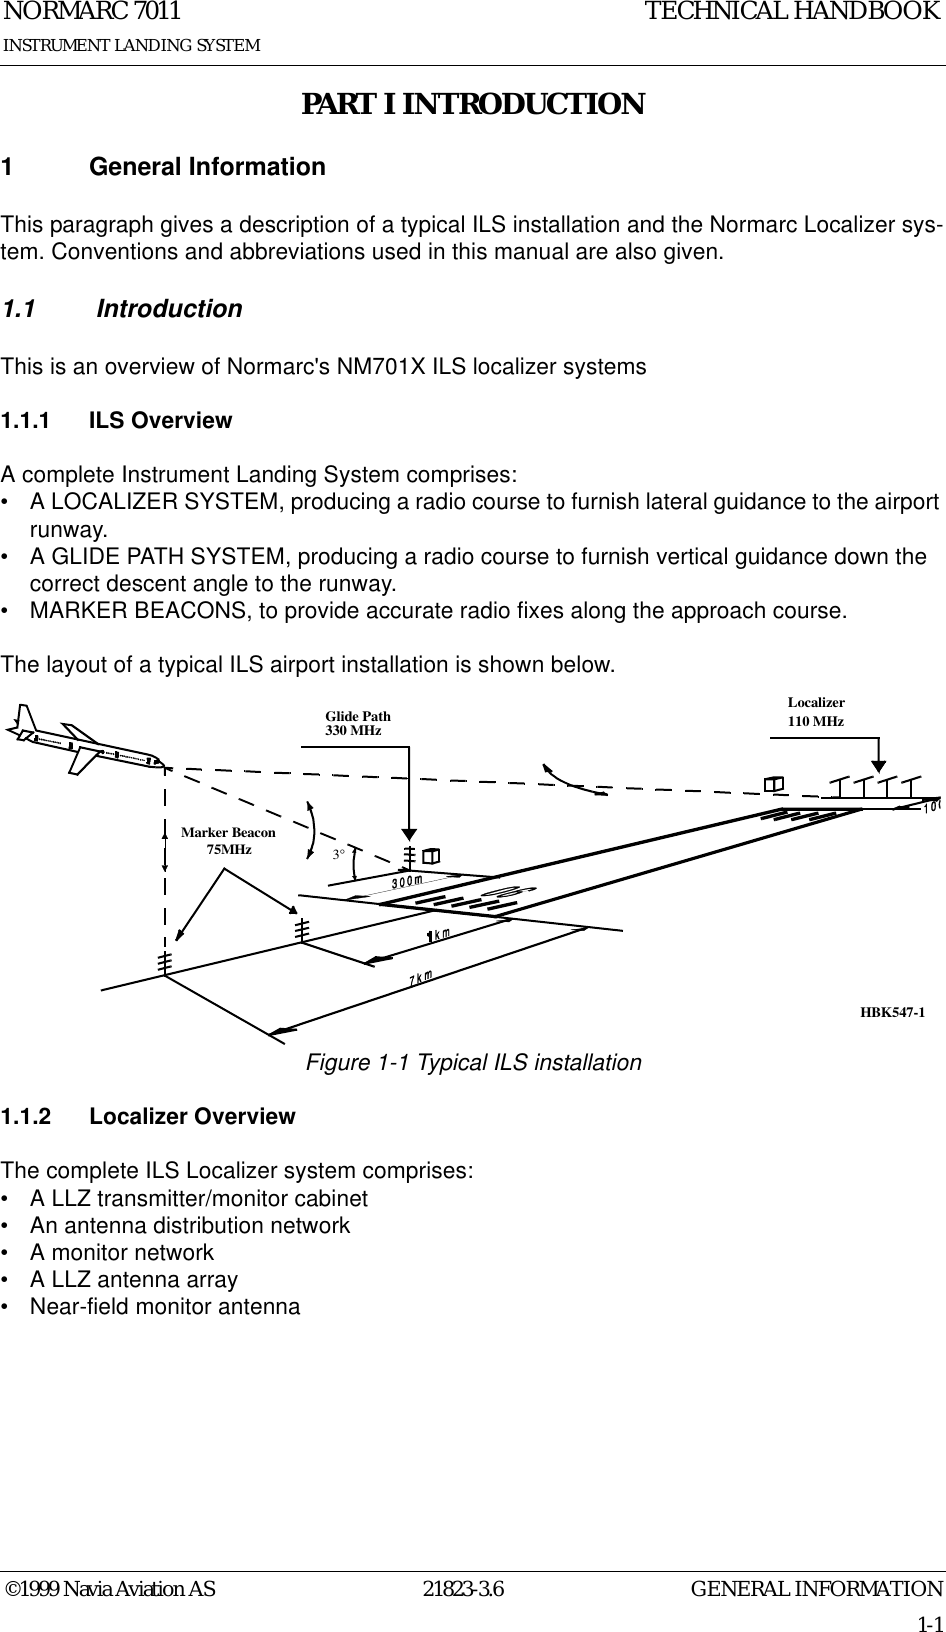 GENERAL INFORMATIONNORMARC 701121823-3.61-1©1999 Navia Aviation ASINSTRUMENT LANDING SYSTEMTECHNICAL HANDBOOKPART I INTRODUCTION1 General InformationThis paragraph gives a description of a typical ILS installation and the Normarc Localizer sys-tem. Conventions and abbreviations used in this manual are also given.1.1  IntroductionThis is an overview of Normarc&apos;s NM701X ILS localizer systems1.1.1 ILS OverviewA complete Instrument Landing System comprises:• A LOCALIZER SYSTEM, producing a radio course to furnish lateral guidance to the airport runway.• A GLIDE PATH SYSTEM, producing a radio course to furnish vertical guidance down the correct descent angle to the runway.• MARKER BEACONS, to provide accurate radio fixes along the approach course.The layout of a typical ILS airport installation is shown below.Figure 1-1 Typical ILS installation1.1.2 Localizer OverviewThe complete ILS Localizer system comprises:• A LLZ transmitter/monitor cabinet• An antenna distribution network• A monitor network• A LLZ antenna array• Near-field monitor antennaLocalizer110 MHzGlide Path330 MHzMarker Beacon75MHz3°HBK547-1